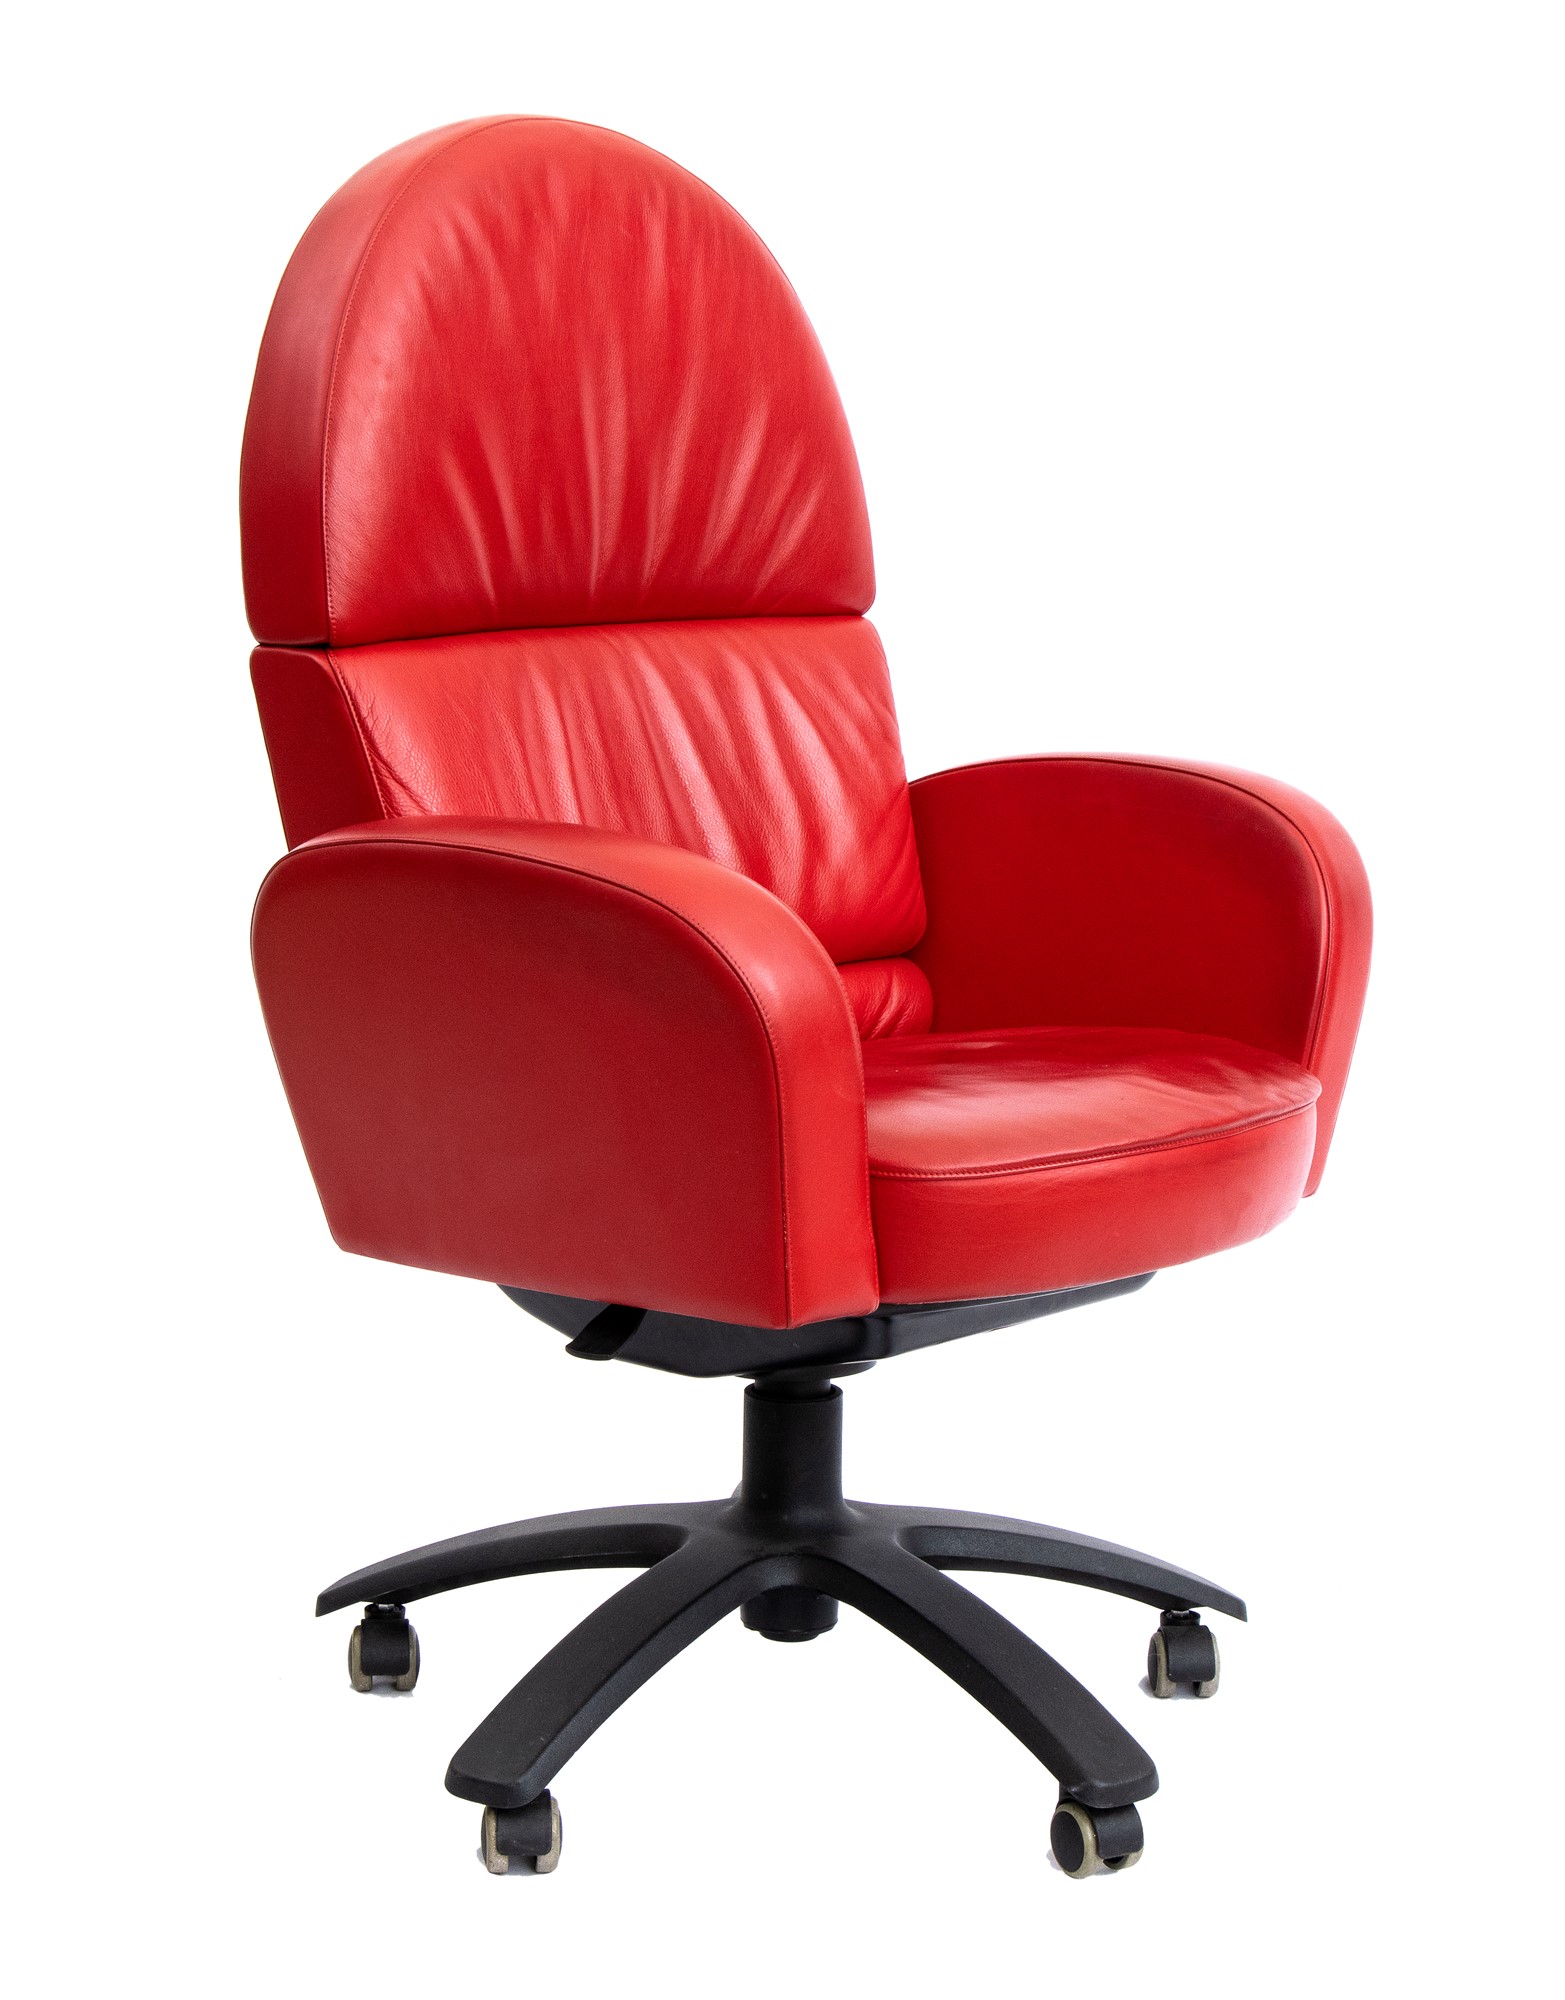 Paolo Pininfarina Torino 1958-Torino 2024 Lot of 5 Ego armchairs and Ego President executive chair - Image 21 of 29